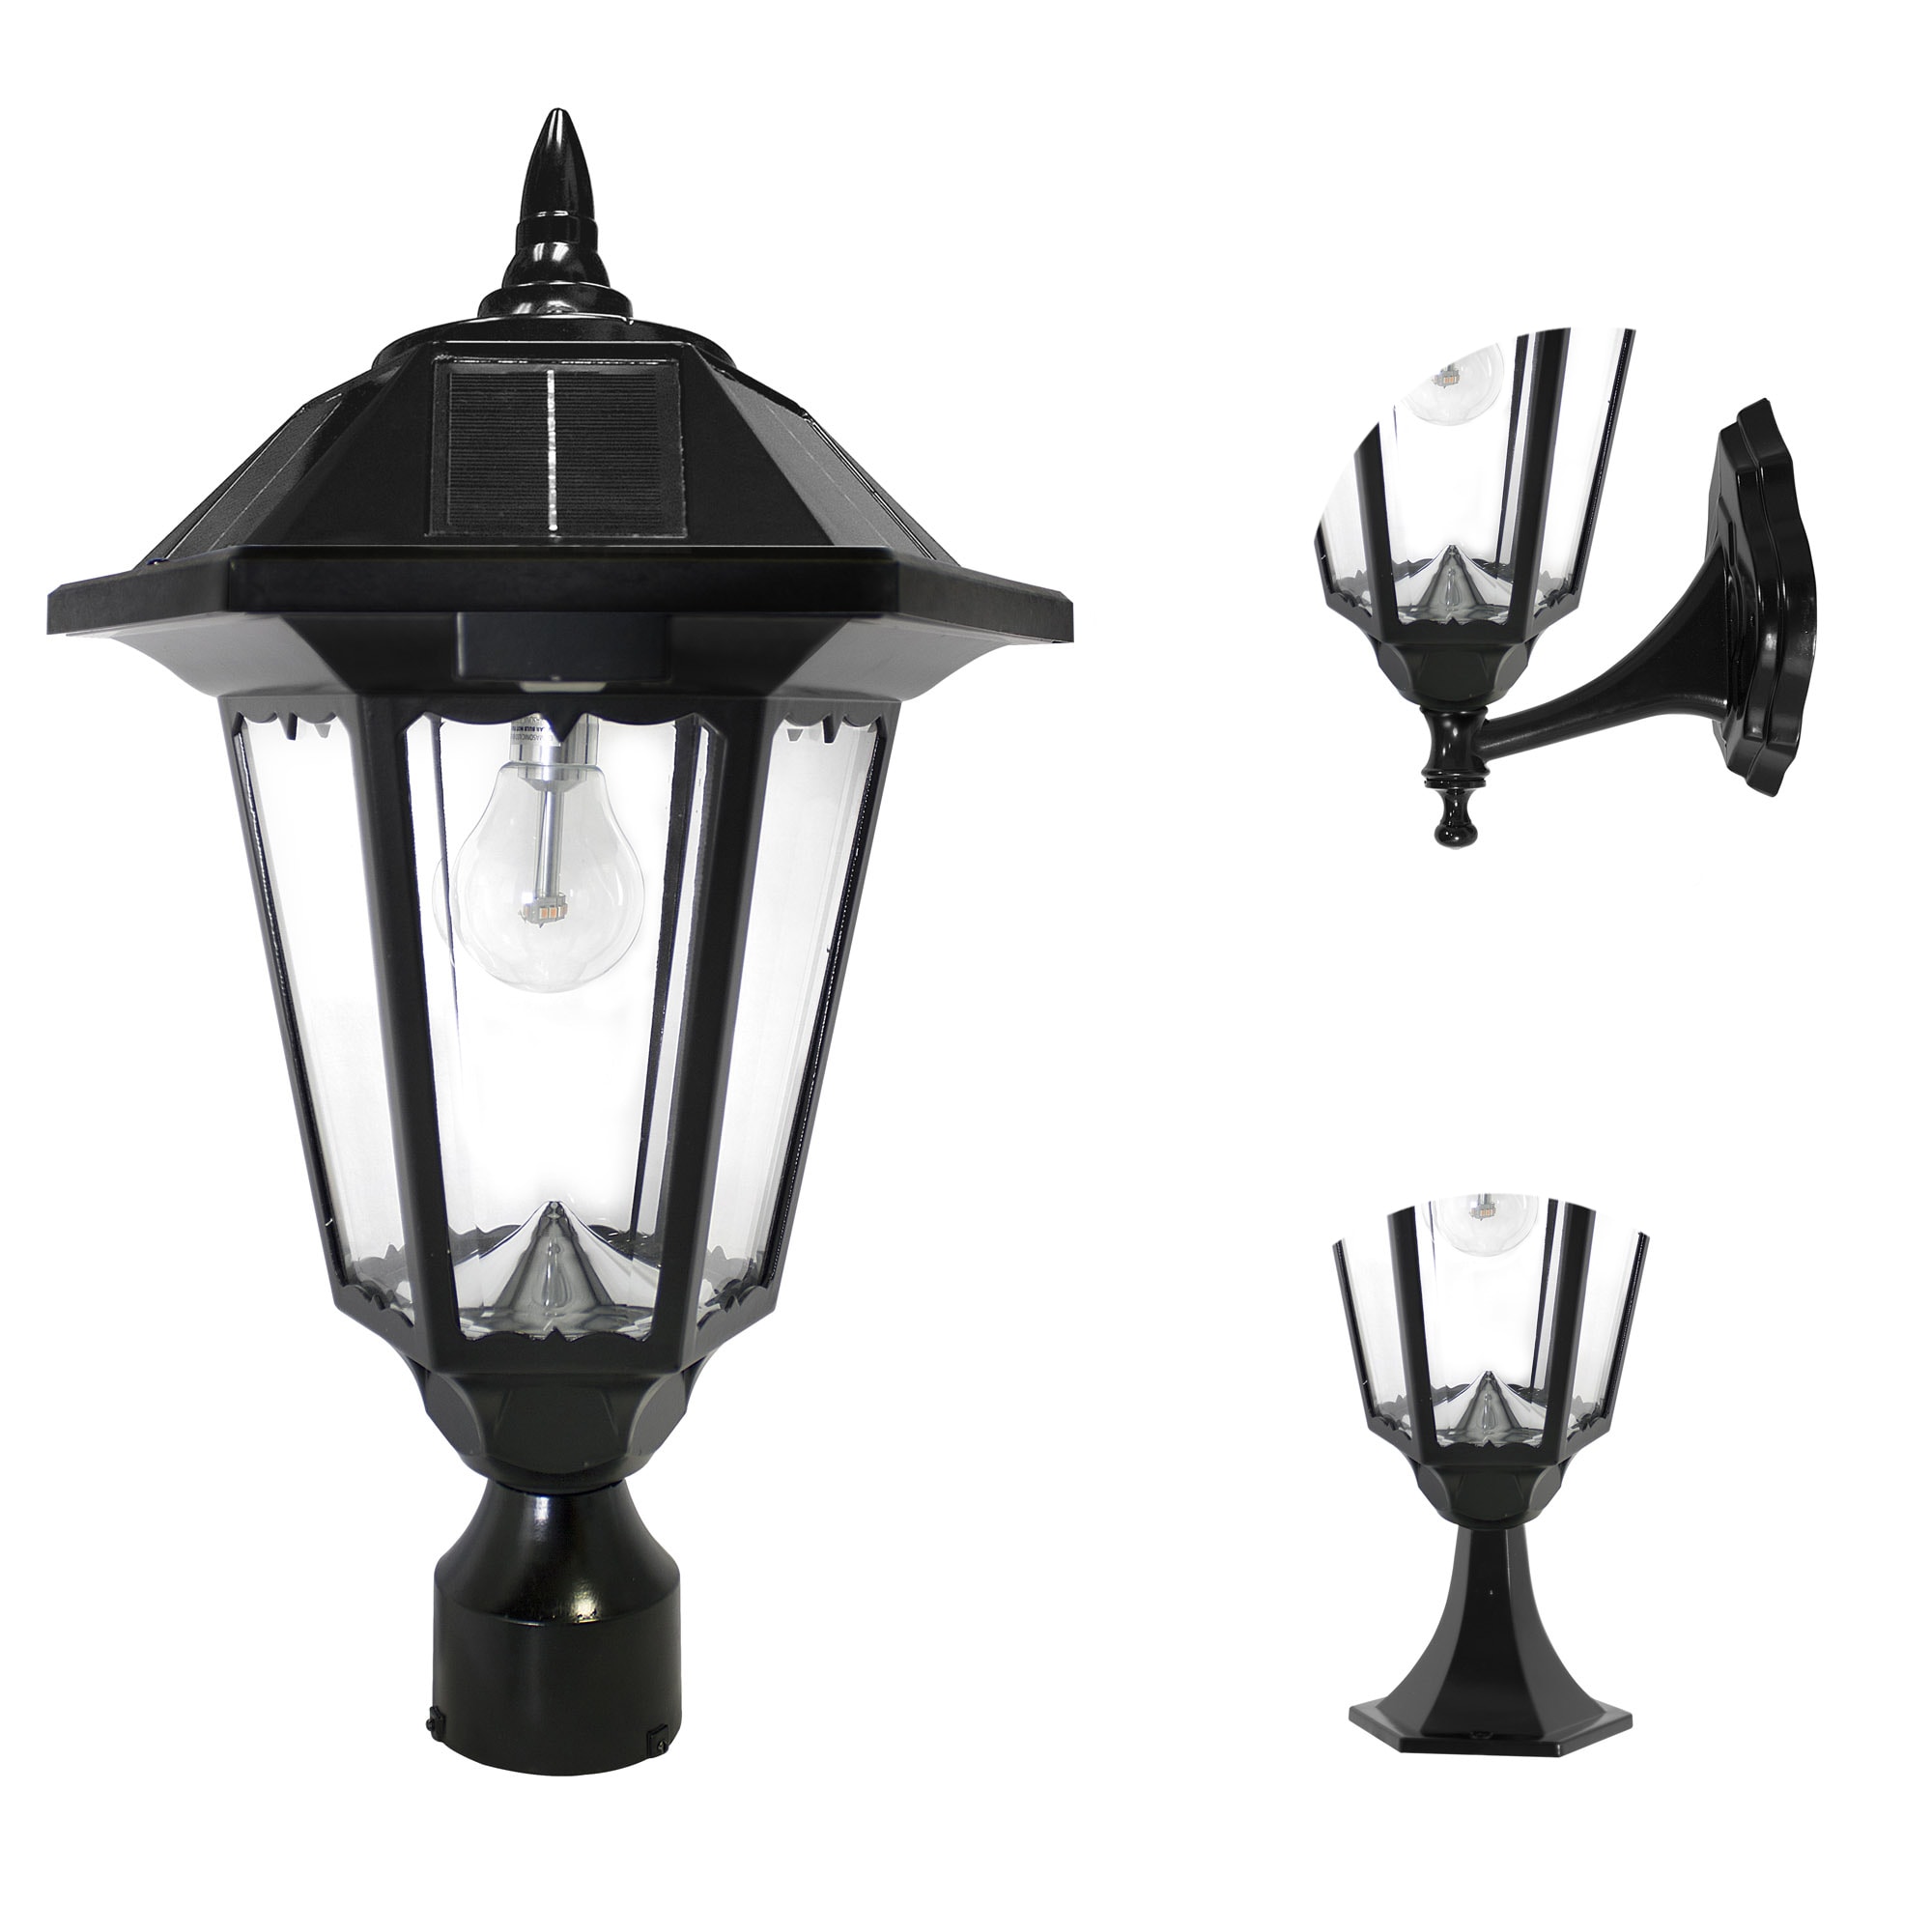 Gama Sonic Windsor Bulb 20-in Black Traditional Post Light at